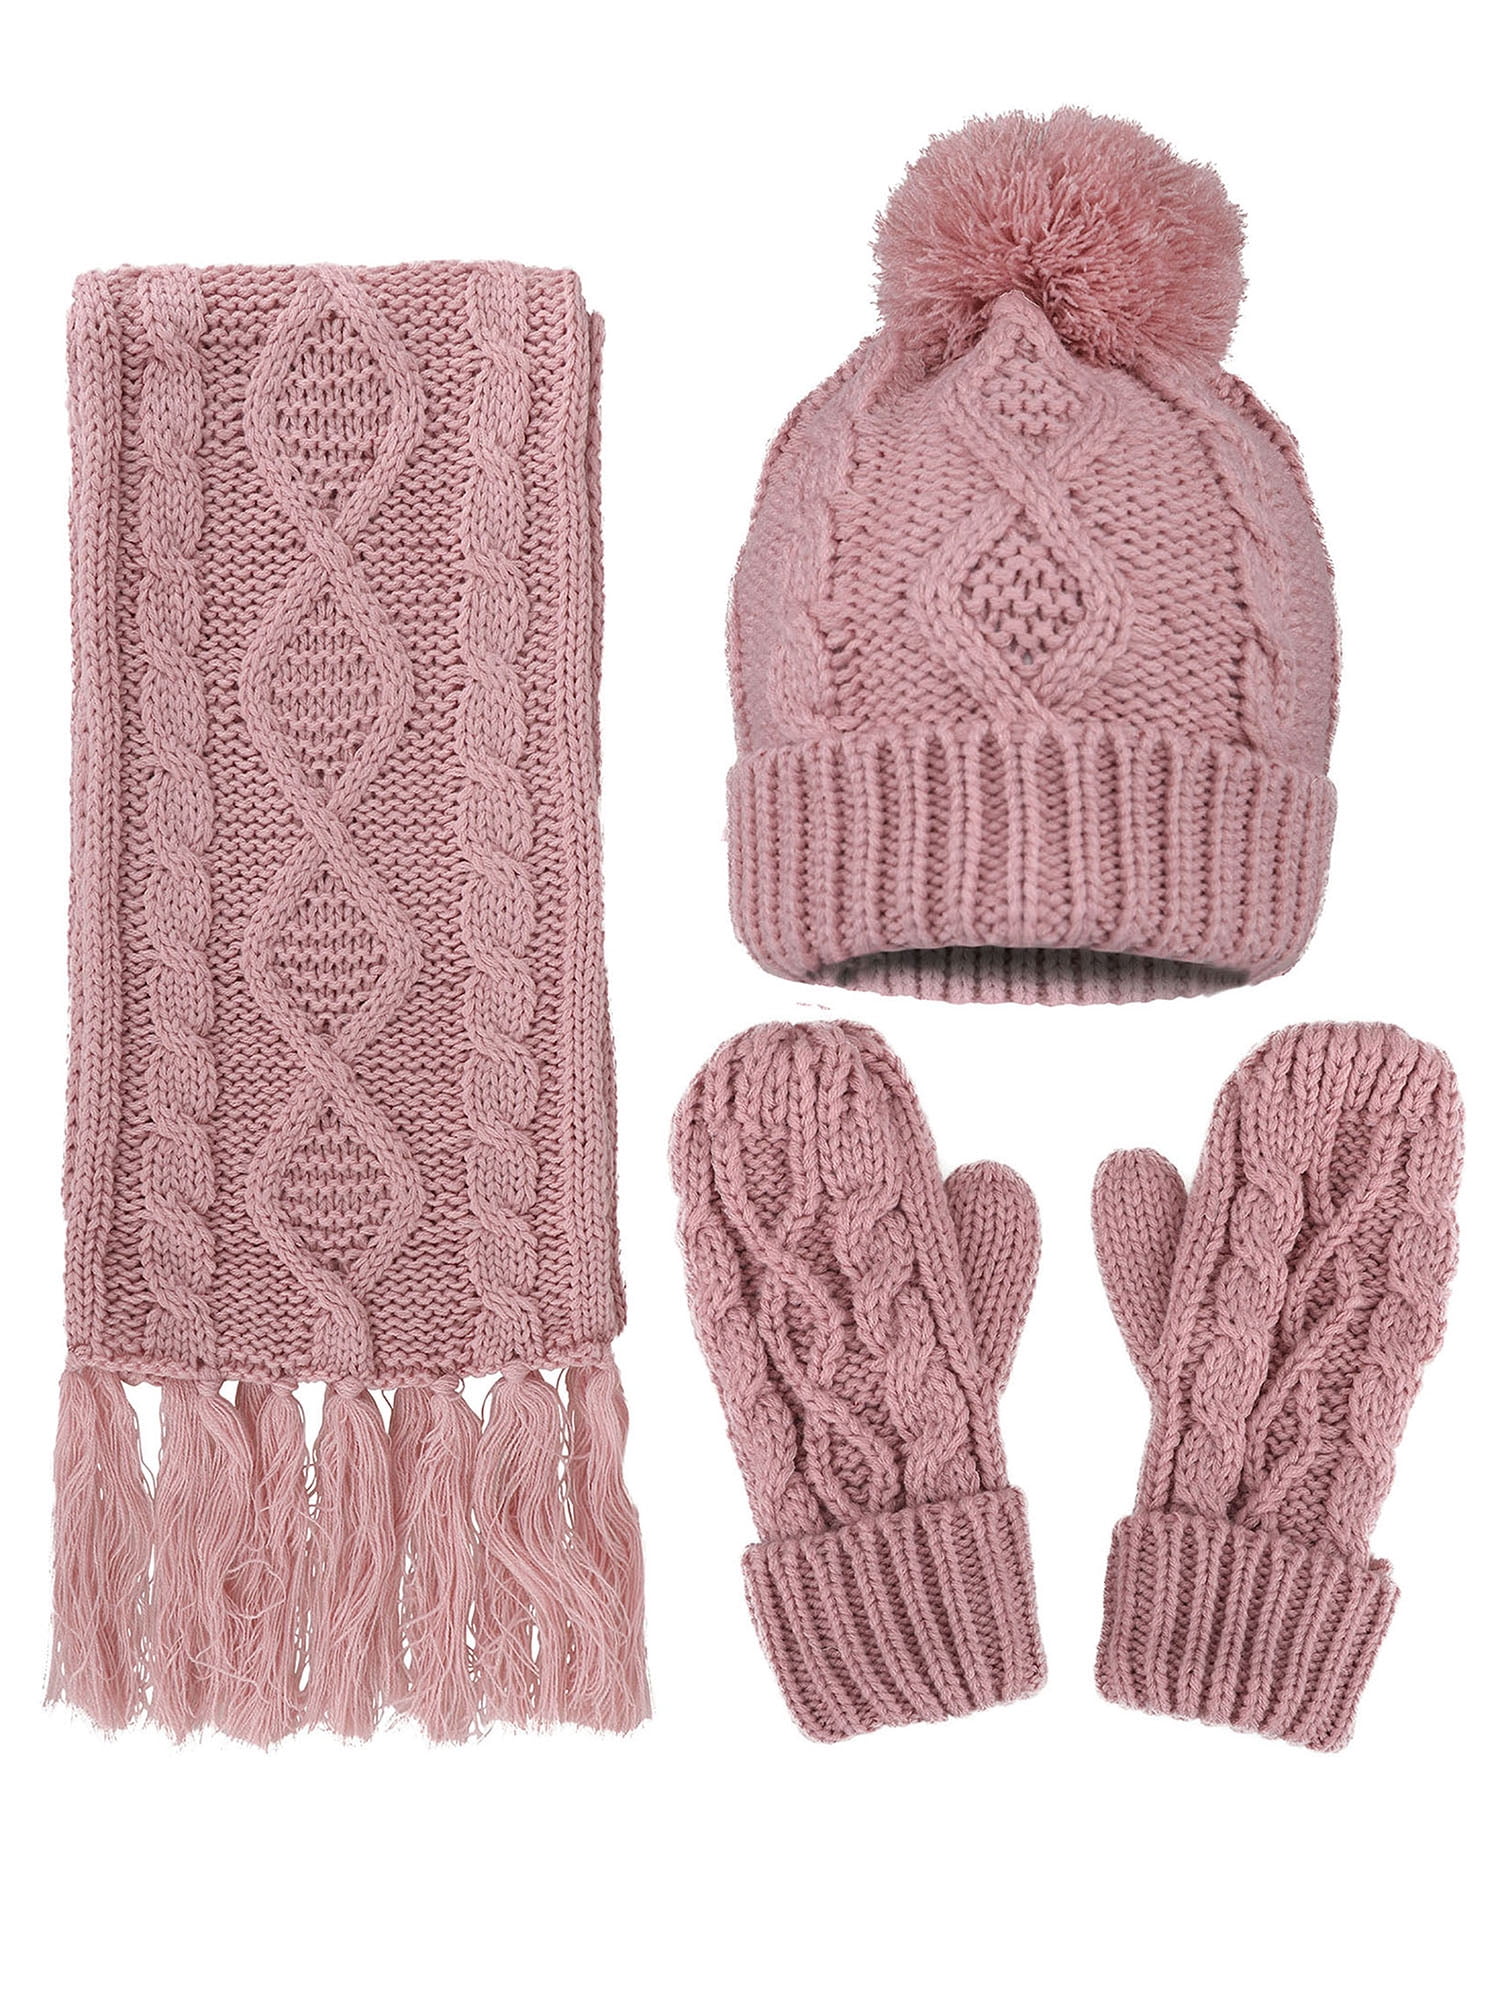 Zhhlinyuan Womens Warm Scarf and Casual Hat Winter Two pieces Knit Gift Set LZ006